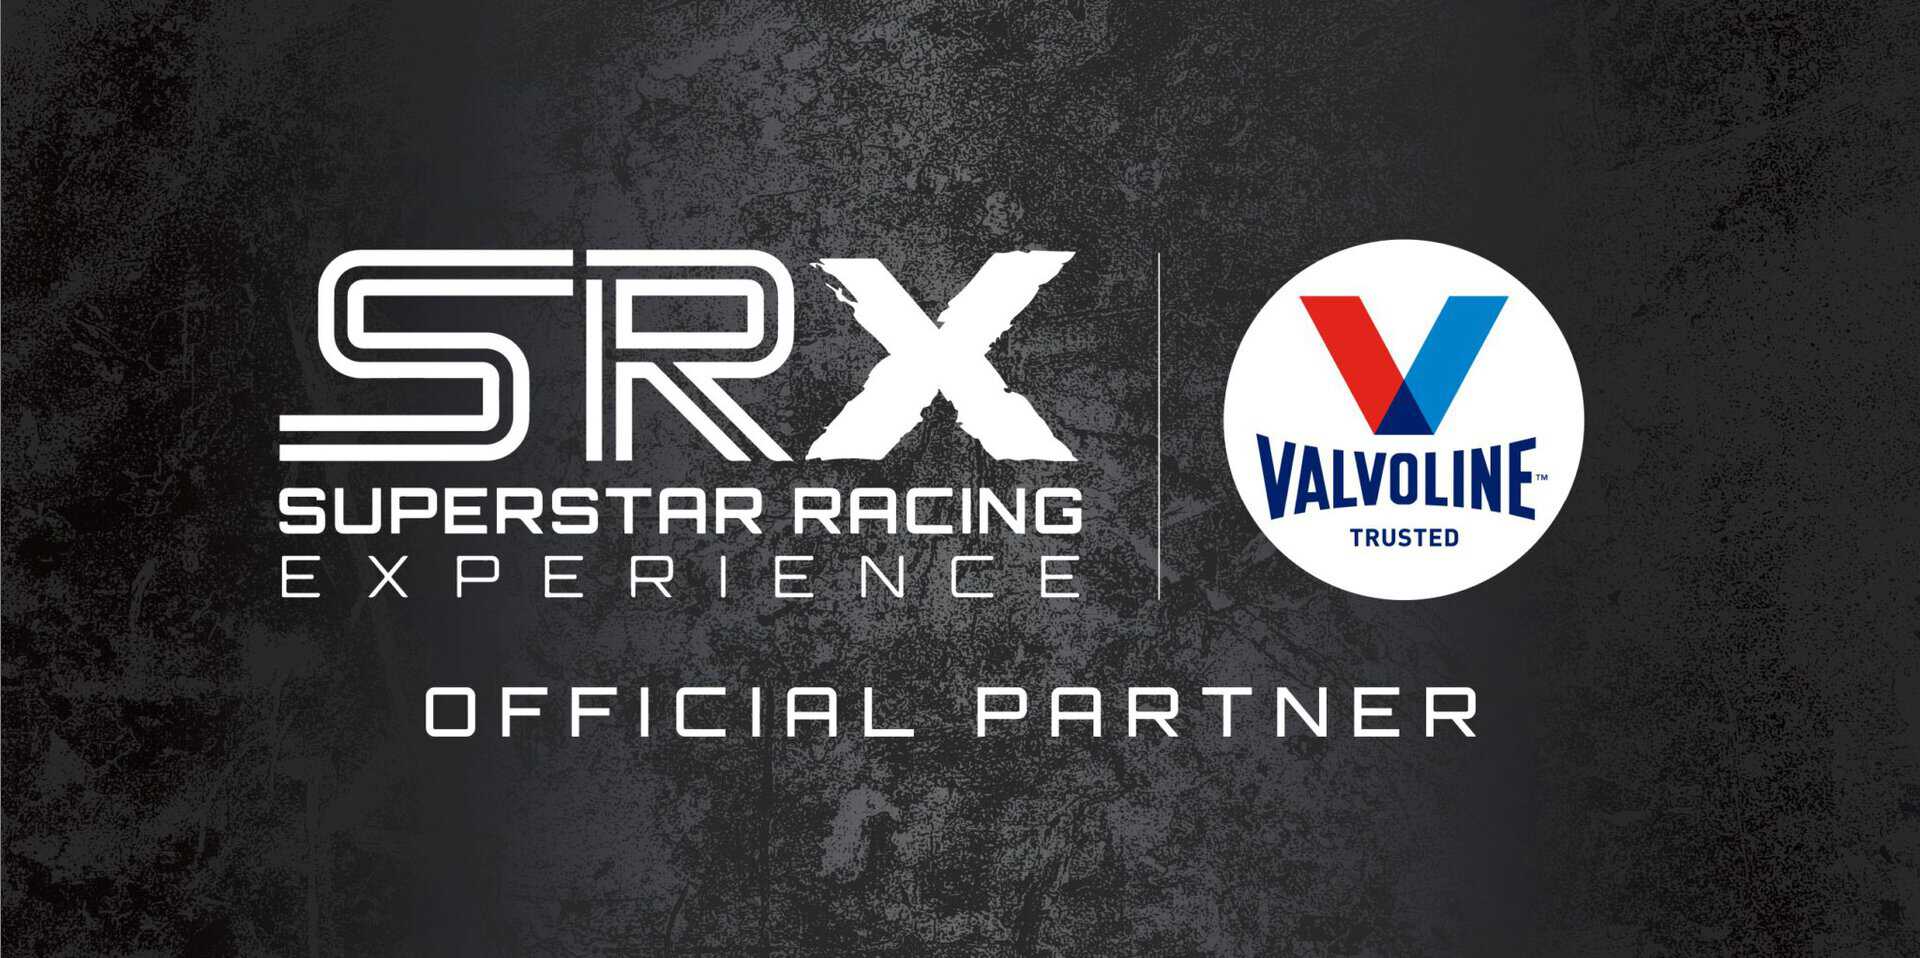 Valvoline Adds to its Racing Heritage by Partnering with SRX